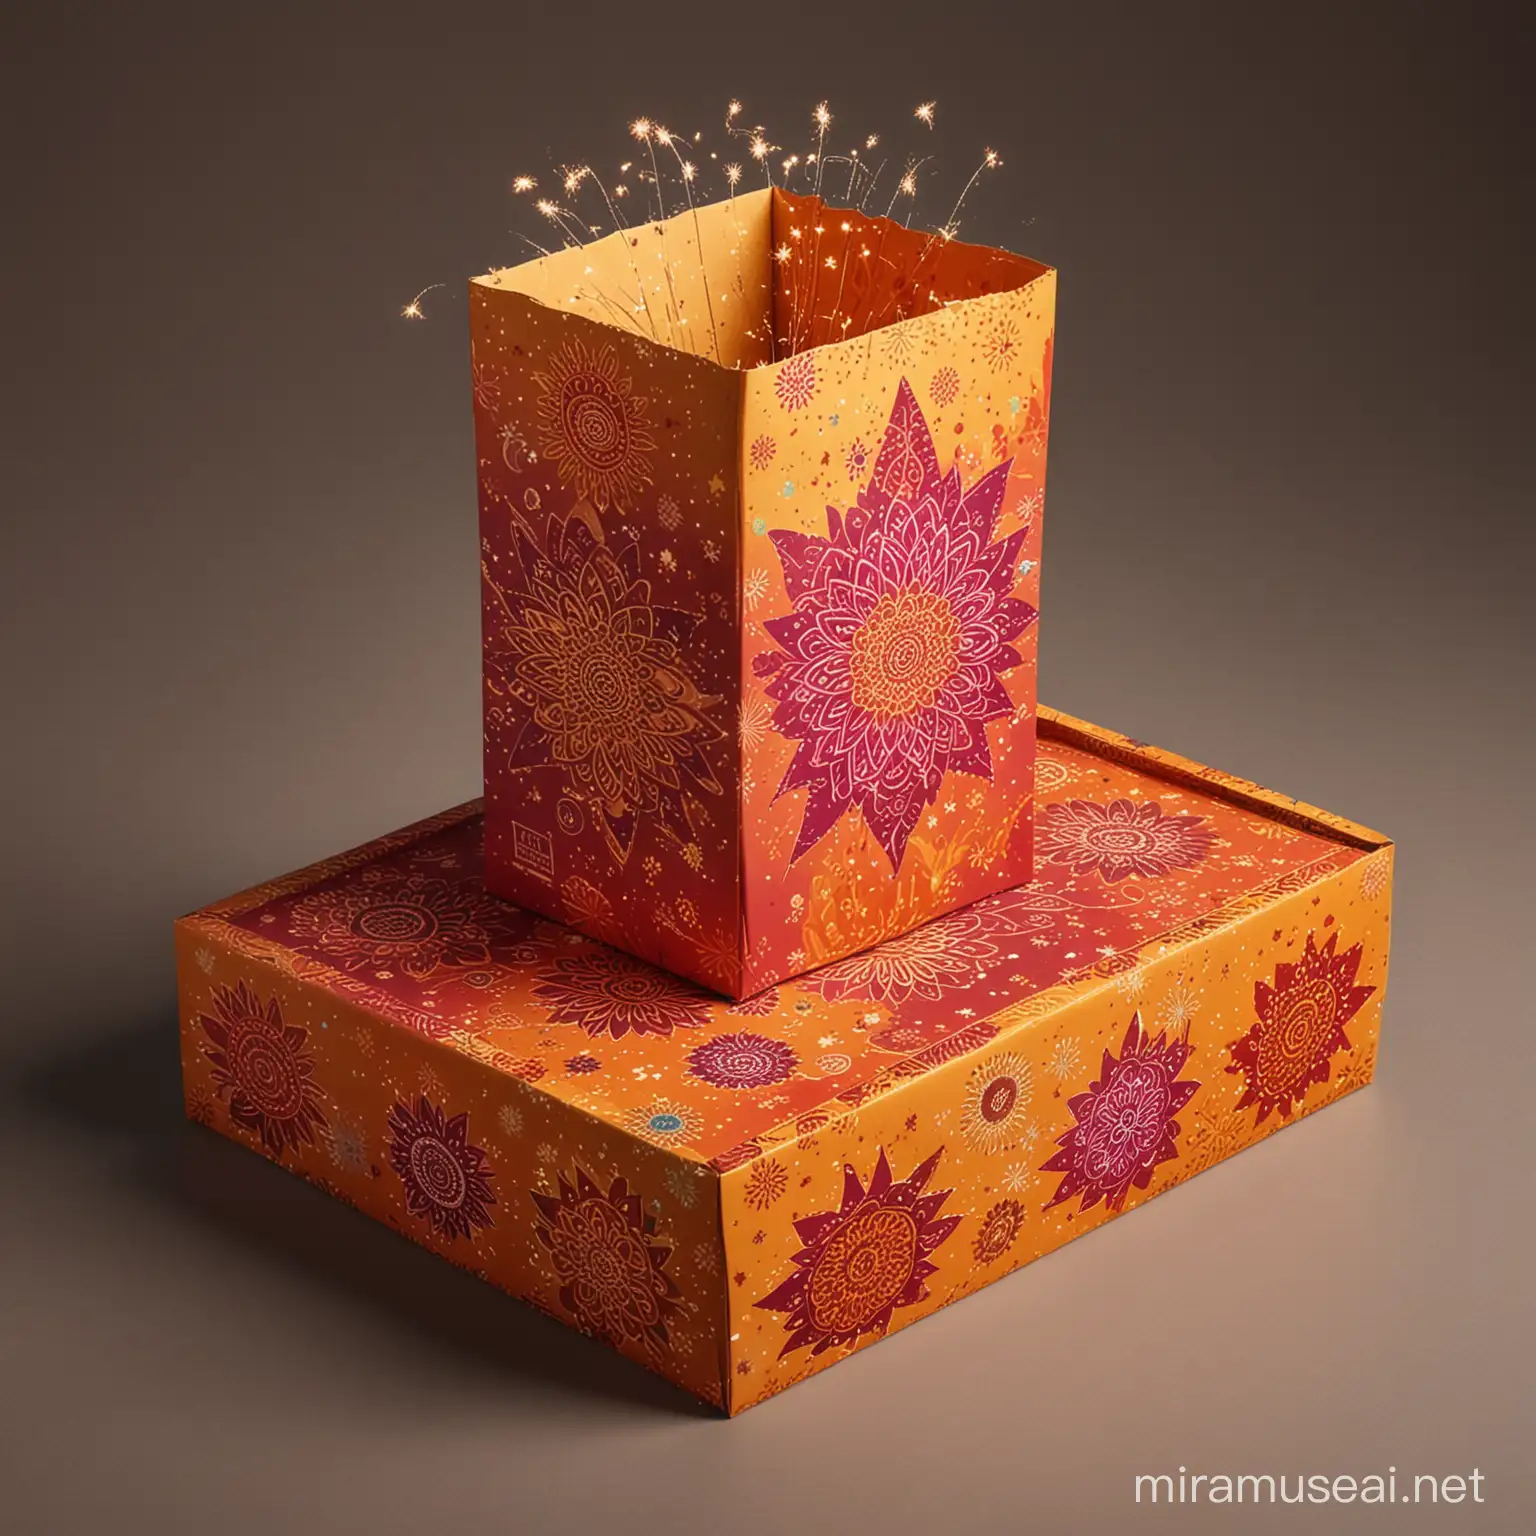 Indian Diwali Fireworks Packaging with Warm Colors and Traditional Elements